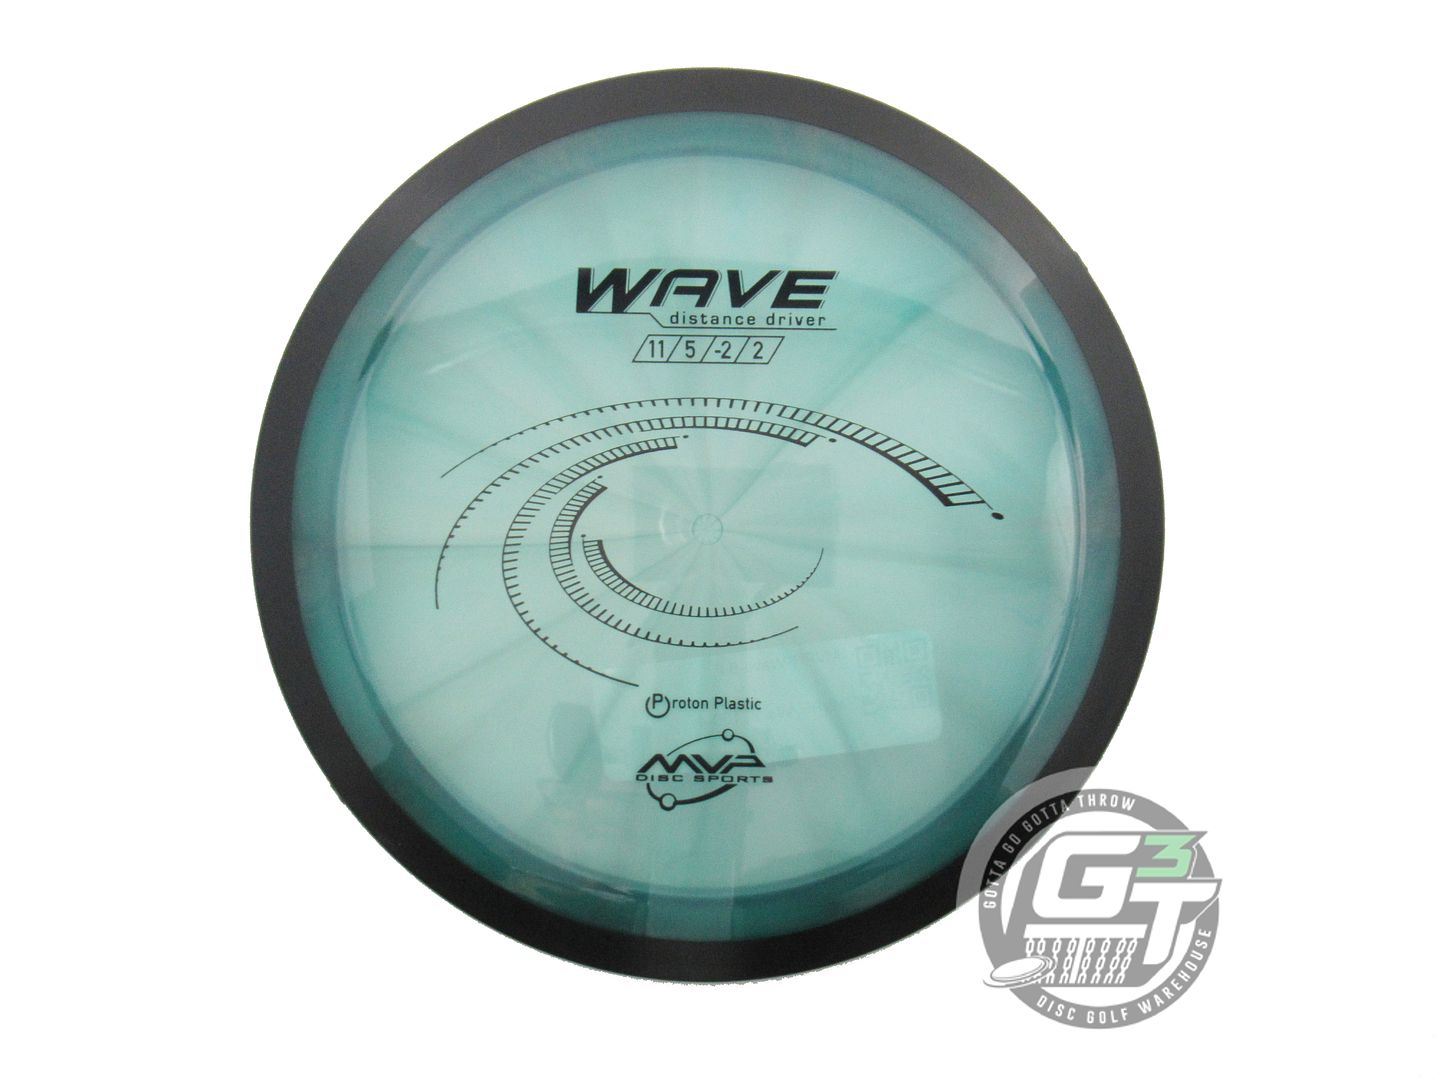 MVP Proton Wave Distance Driver Golf Disc (Individually Listed)